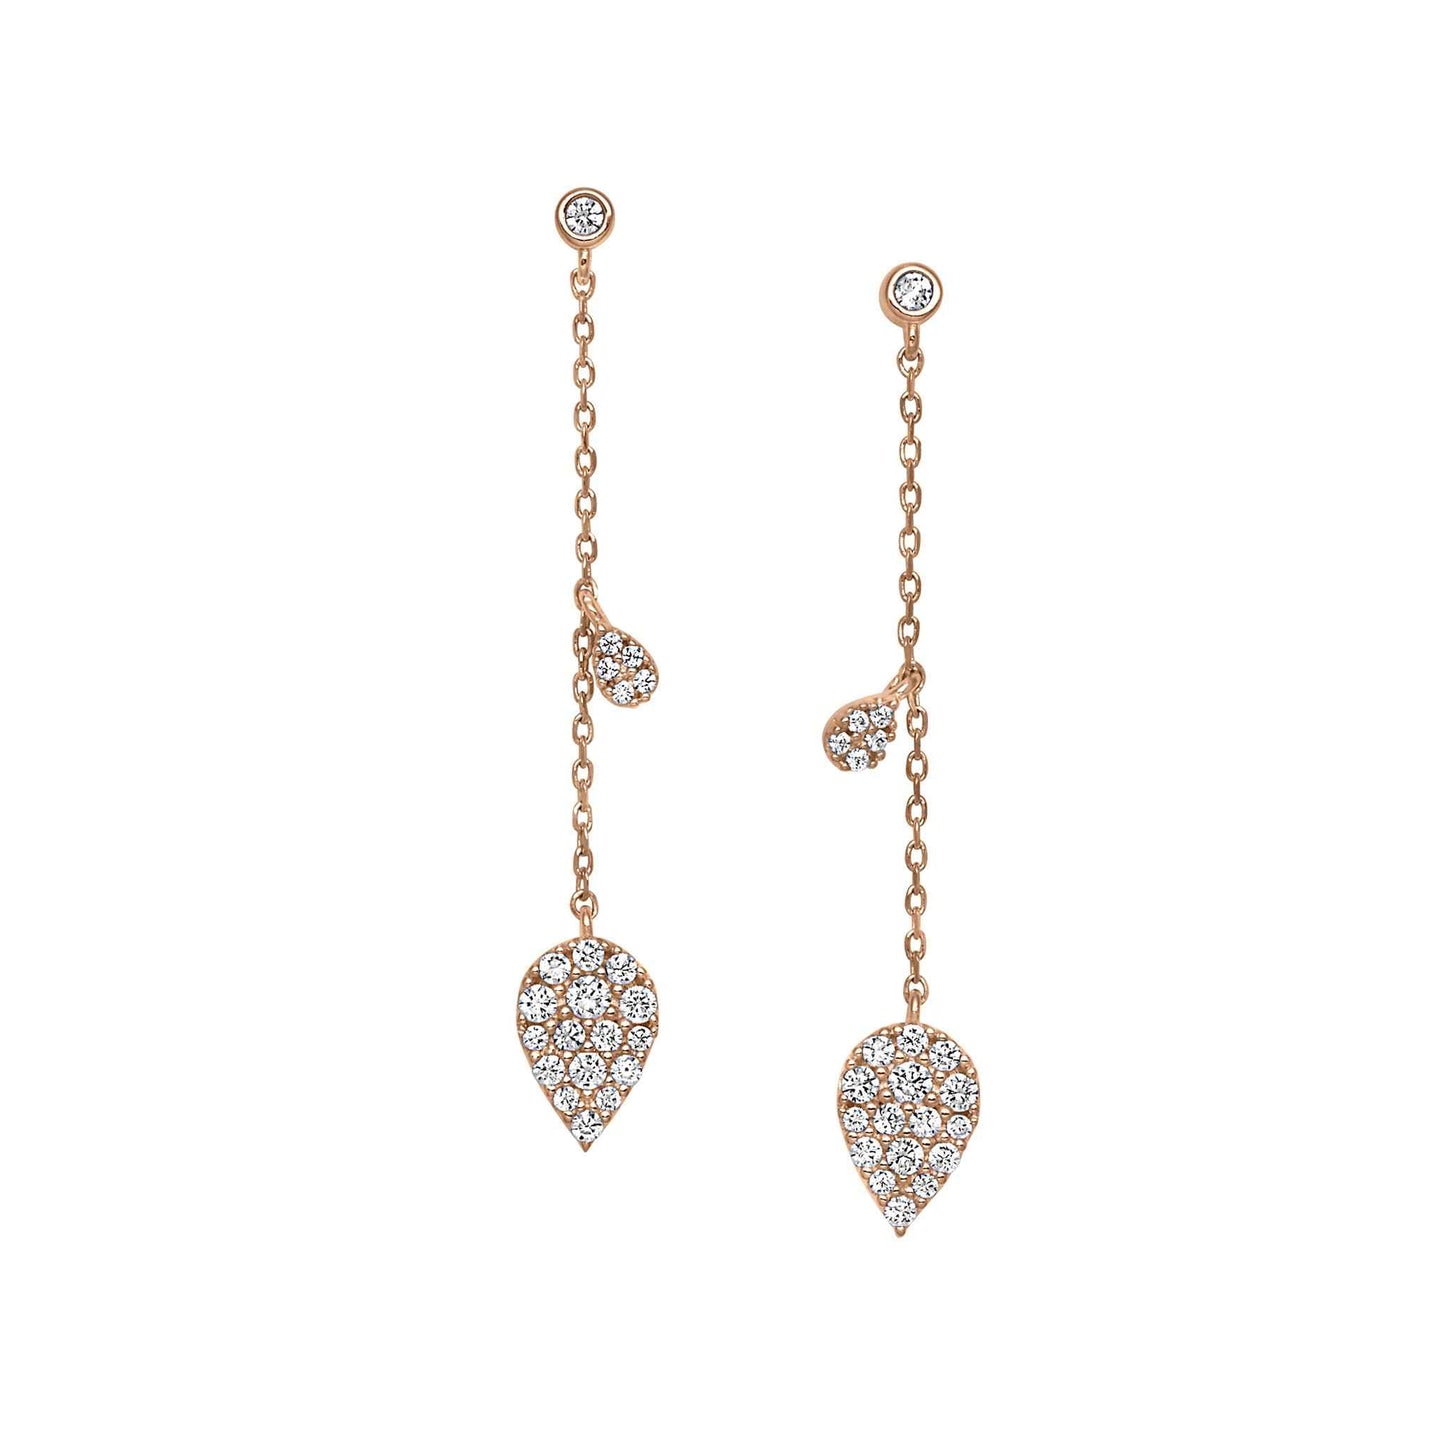 A sterling silver leaf drop earrings with simulated diamonds displayed on a neutral white background.